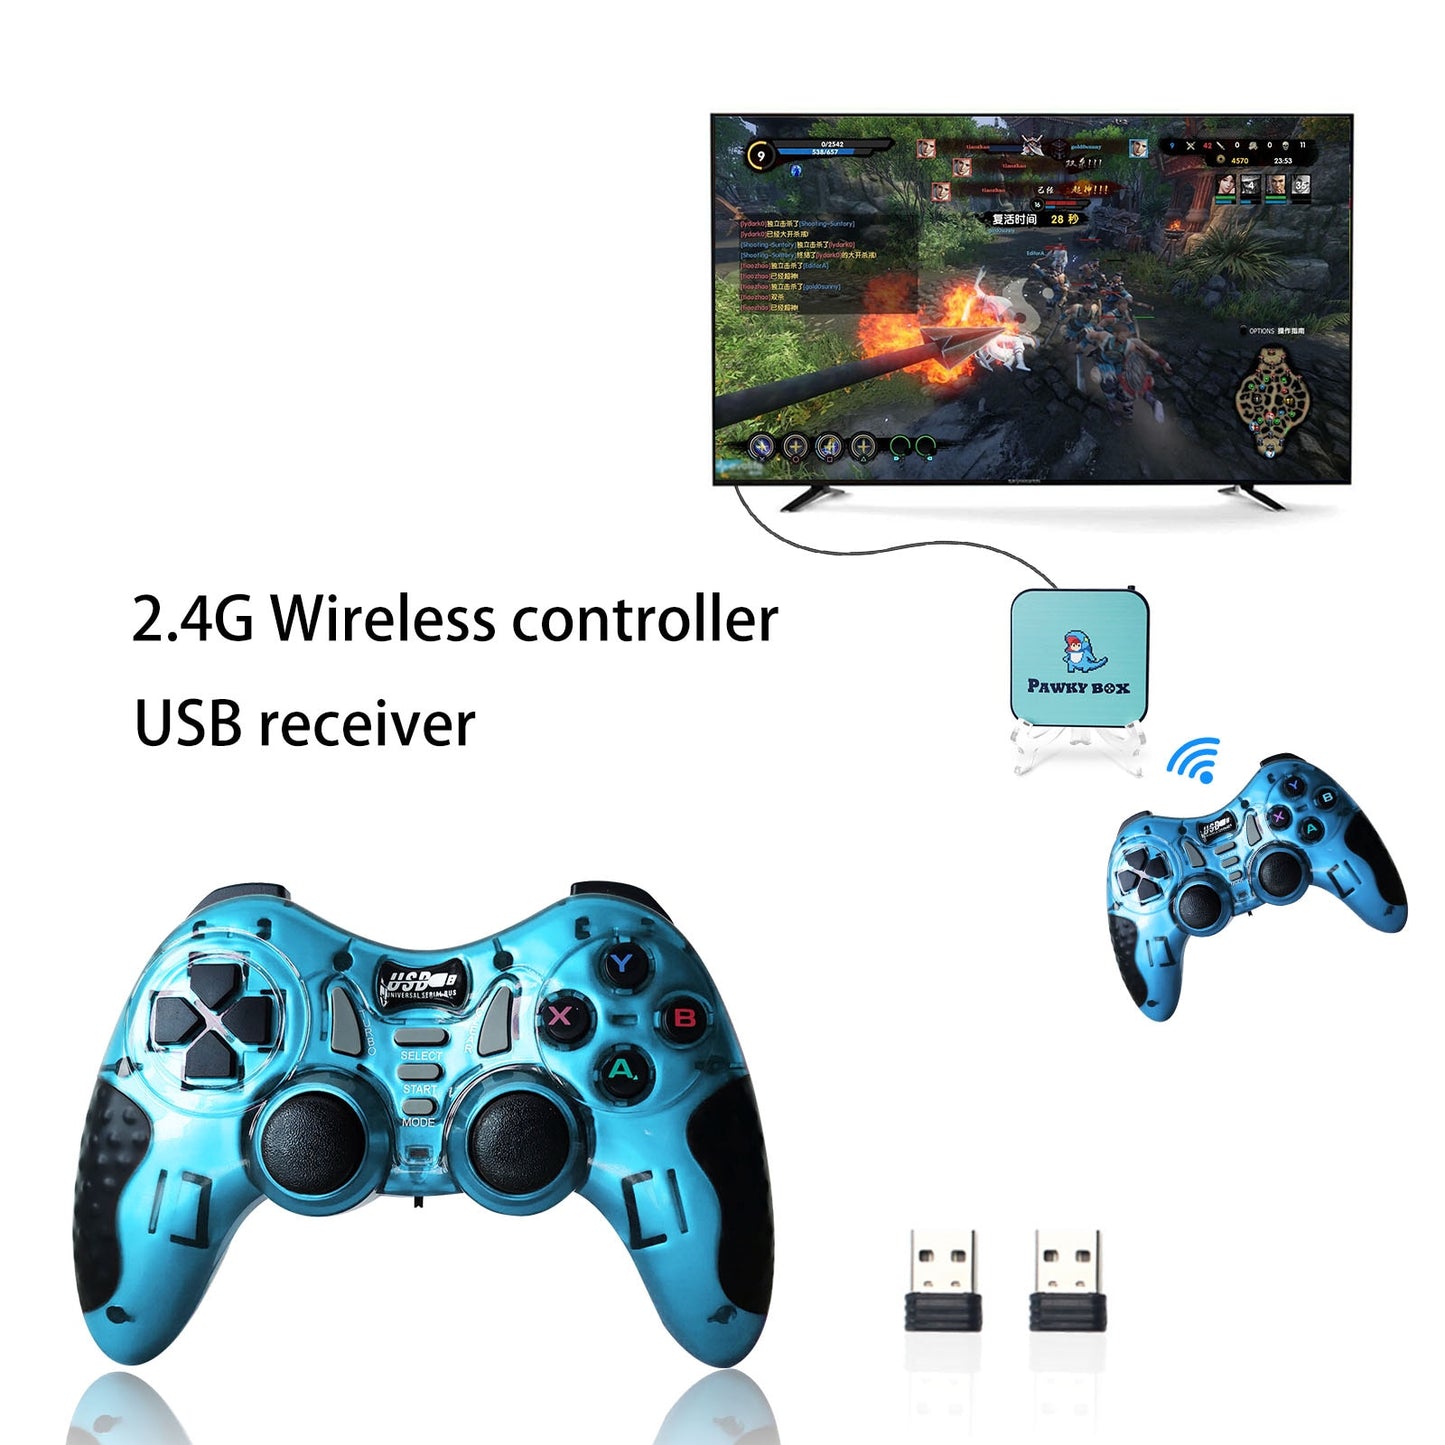 2pcs/set 2.4G Wireless Game Controller with USB Adapter for PS3 Gamepad for PC Laptop Android TV Box Device Gaming Joystick